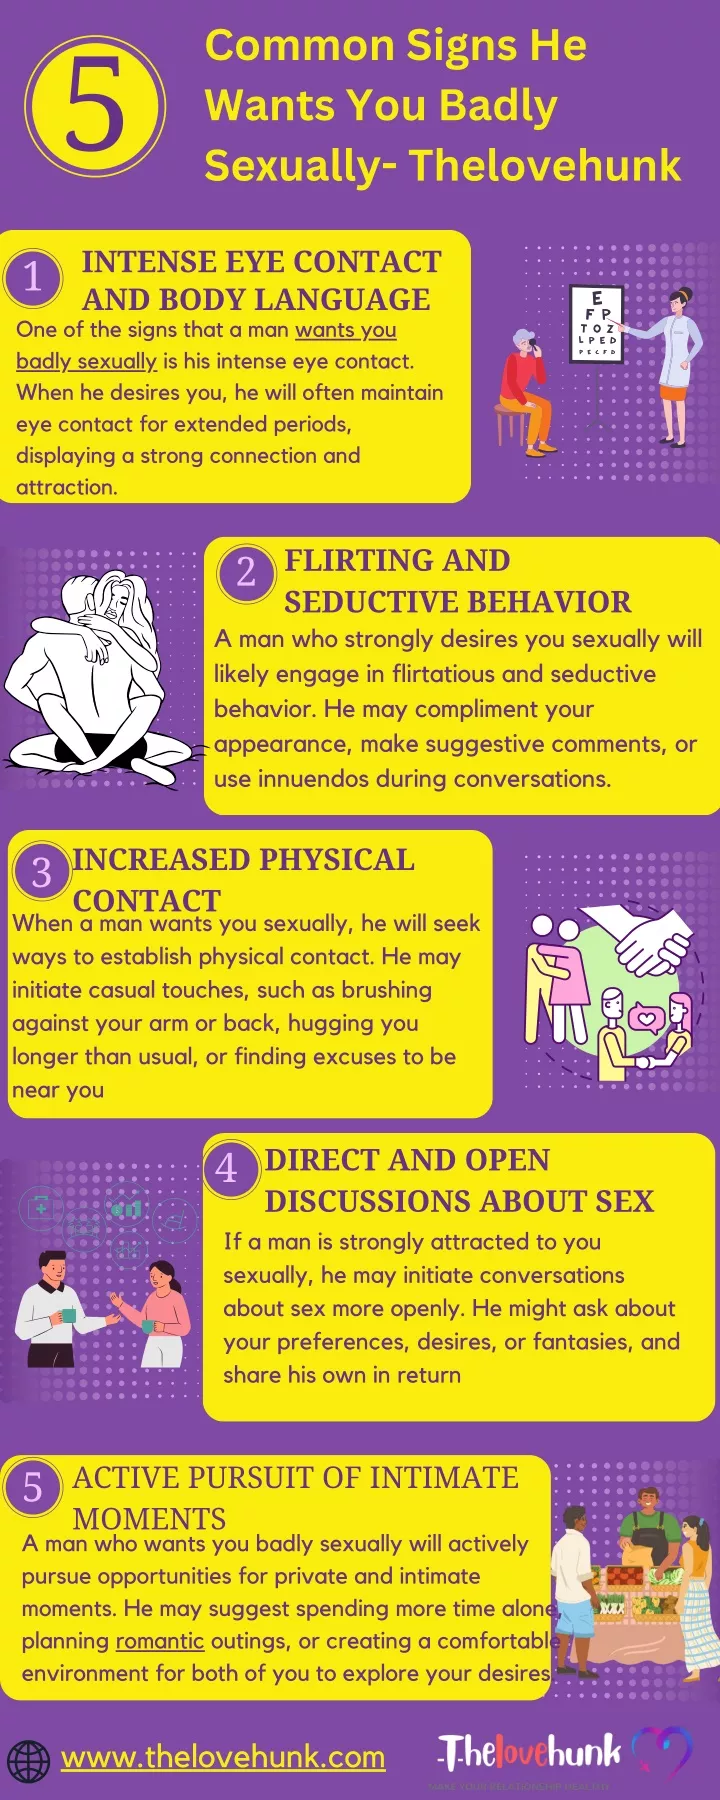 common signs he wants you badly sexually